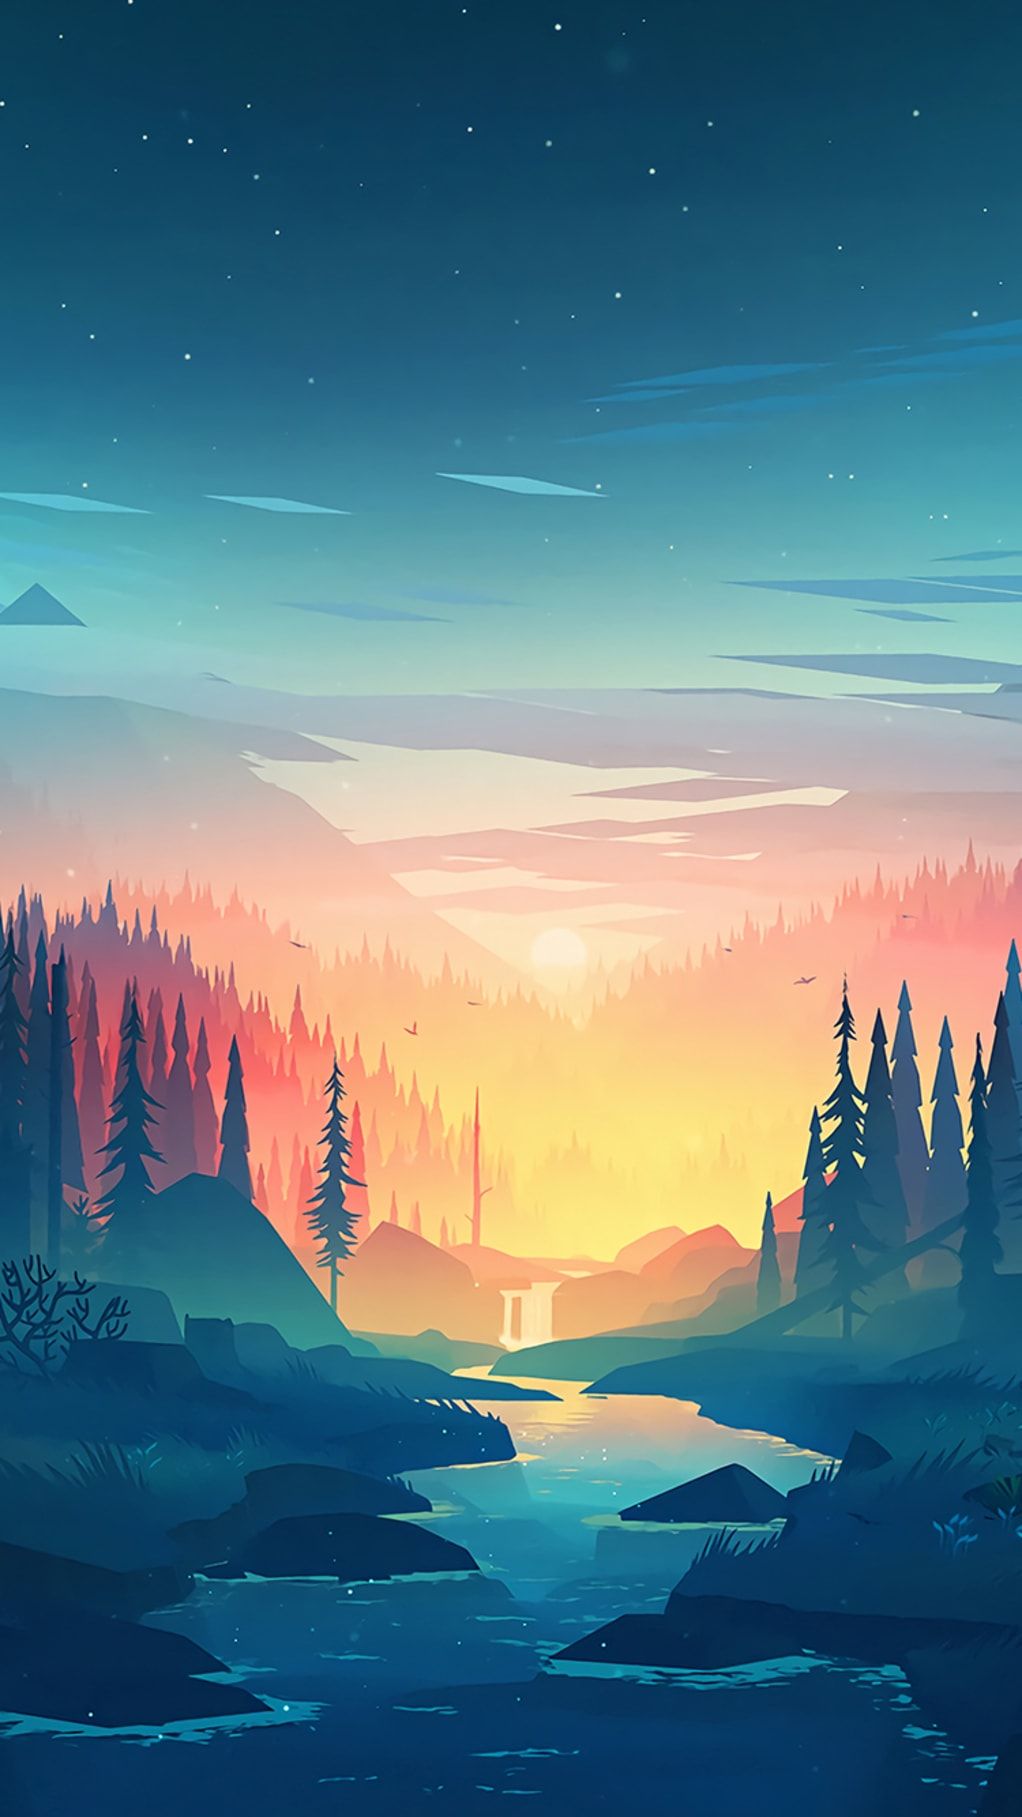 Wallpaper That Will Look Perfect On Your iPhone. Illustration de paysage, Dessin paysage, Fond ecran paysage